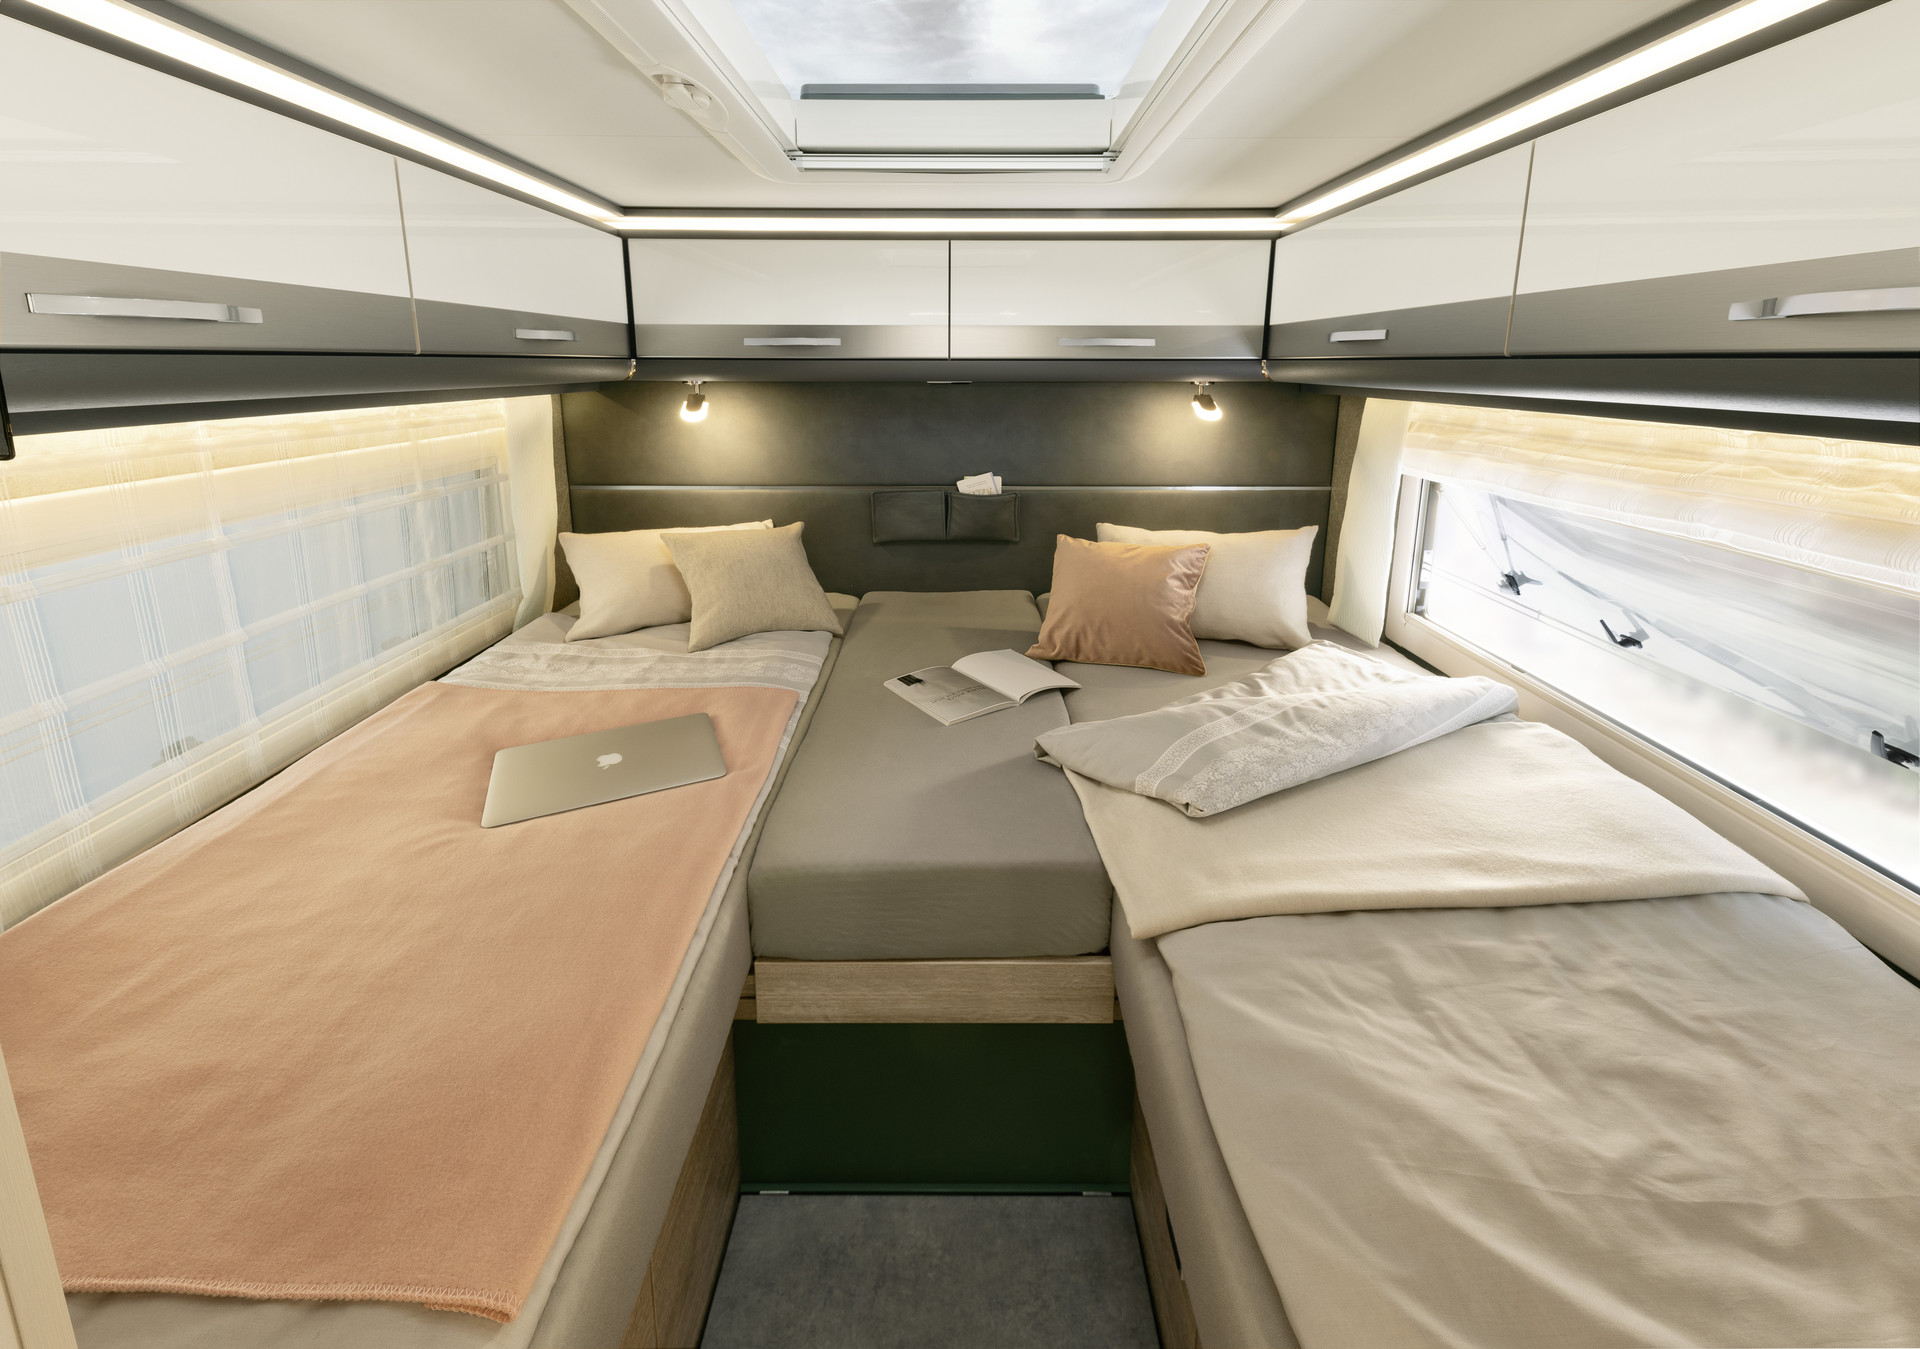 The single beds have dimensions of 200 x 80 or 195 x 80 cm. They can be converted into a huge sleeping area that stretches across the entire width of the vehicle. • A 9000-2